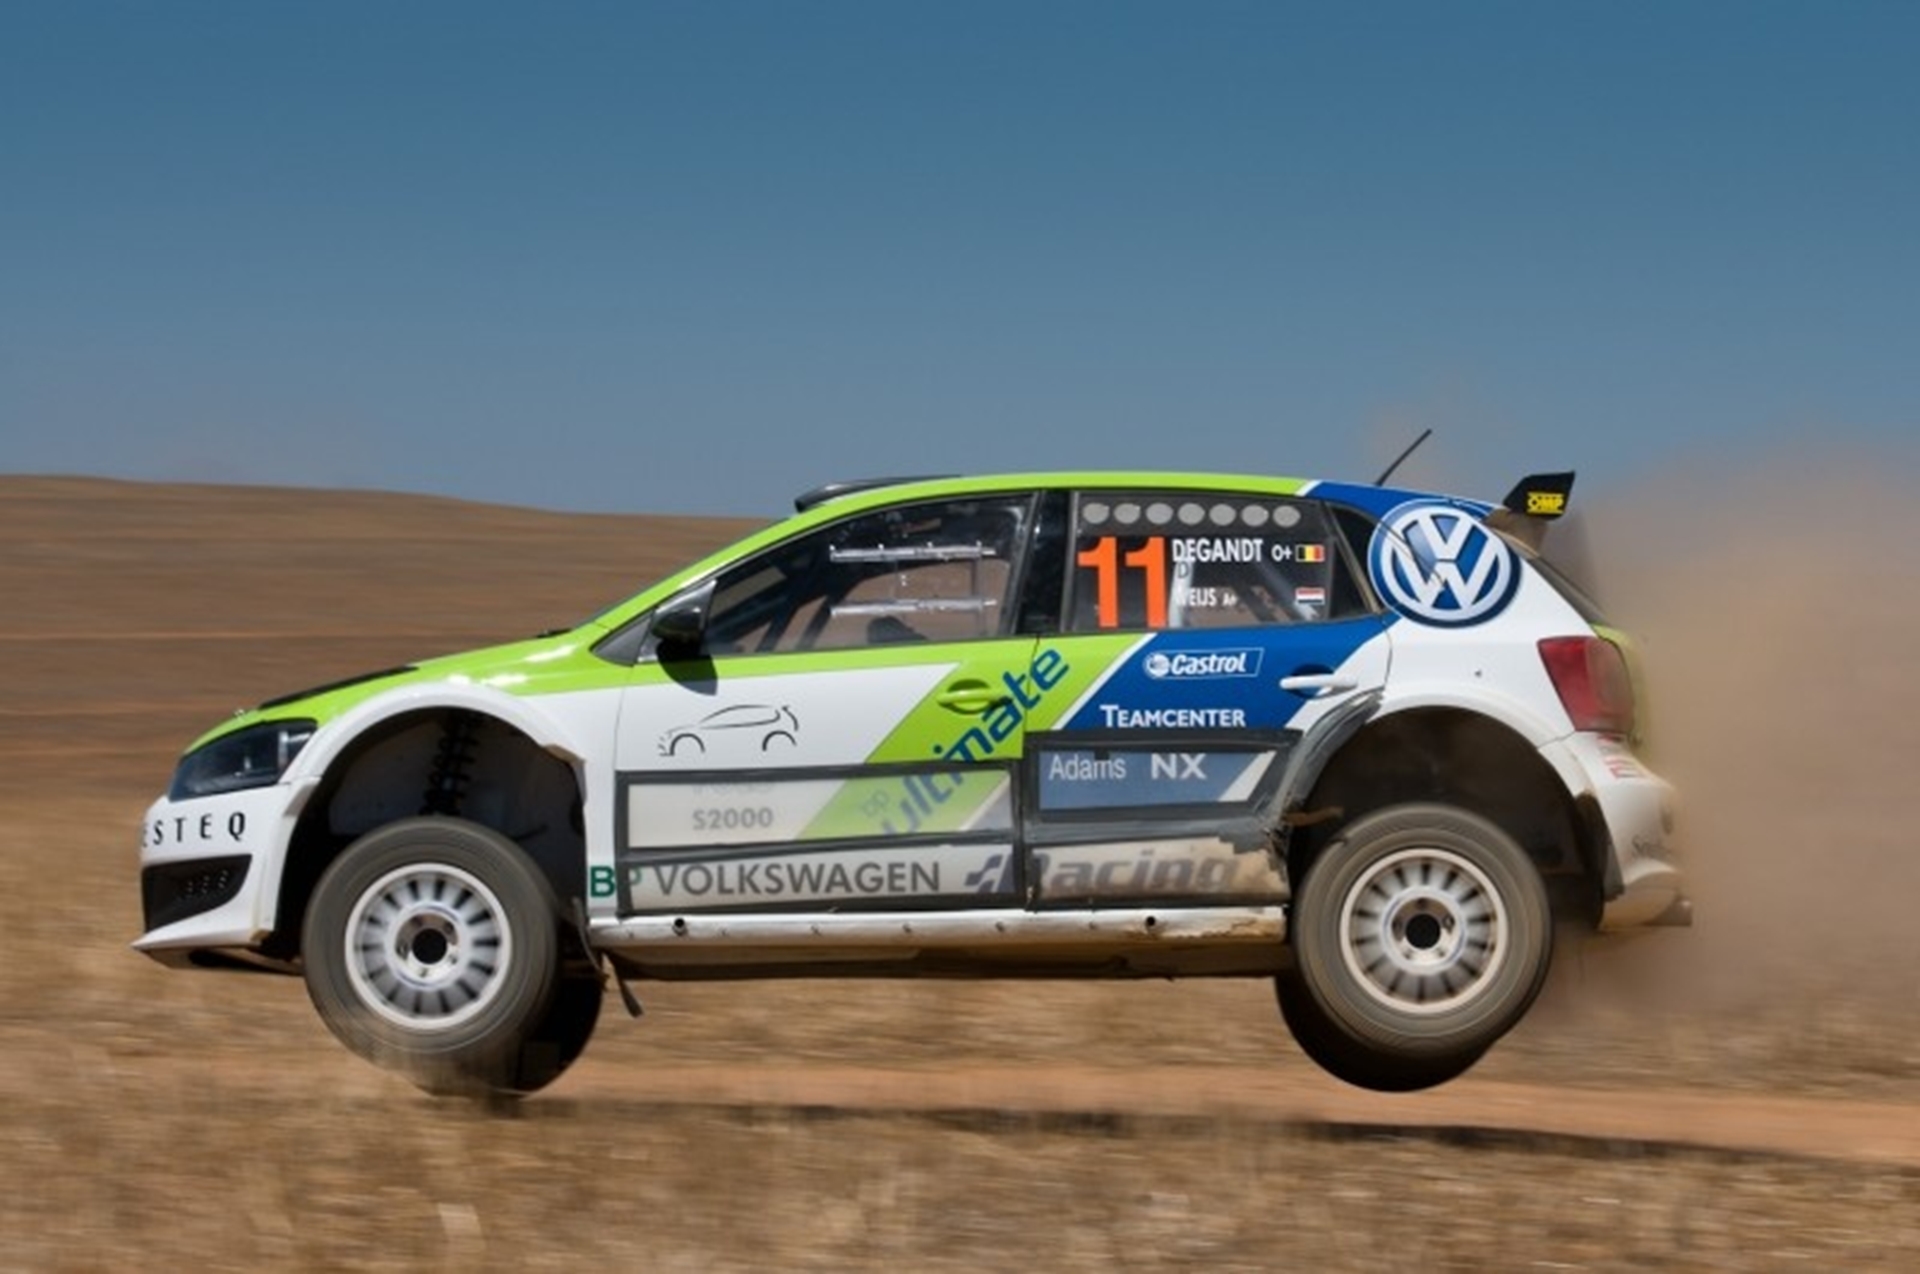 BP Volkswagen team ready to bring the action to national rally championship